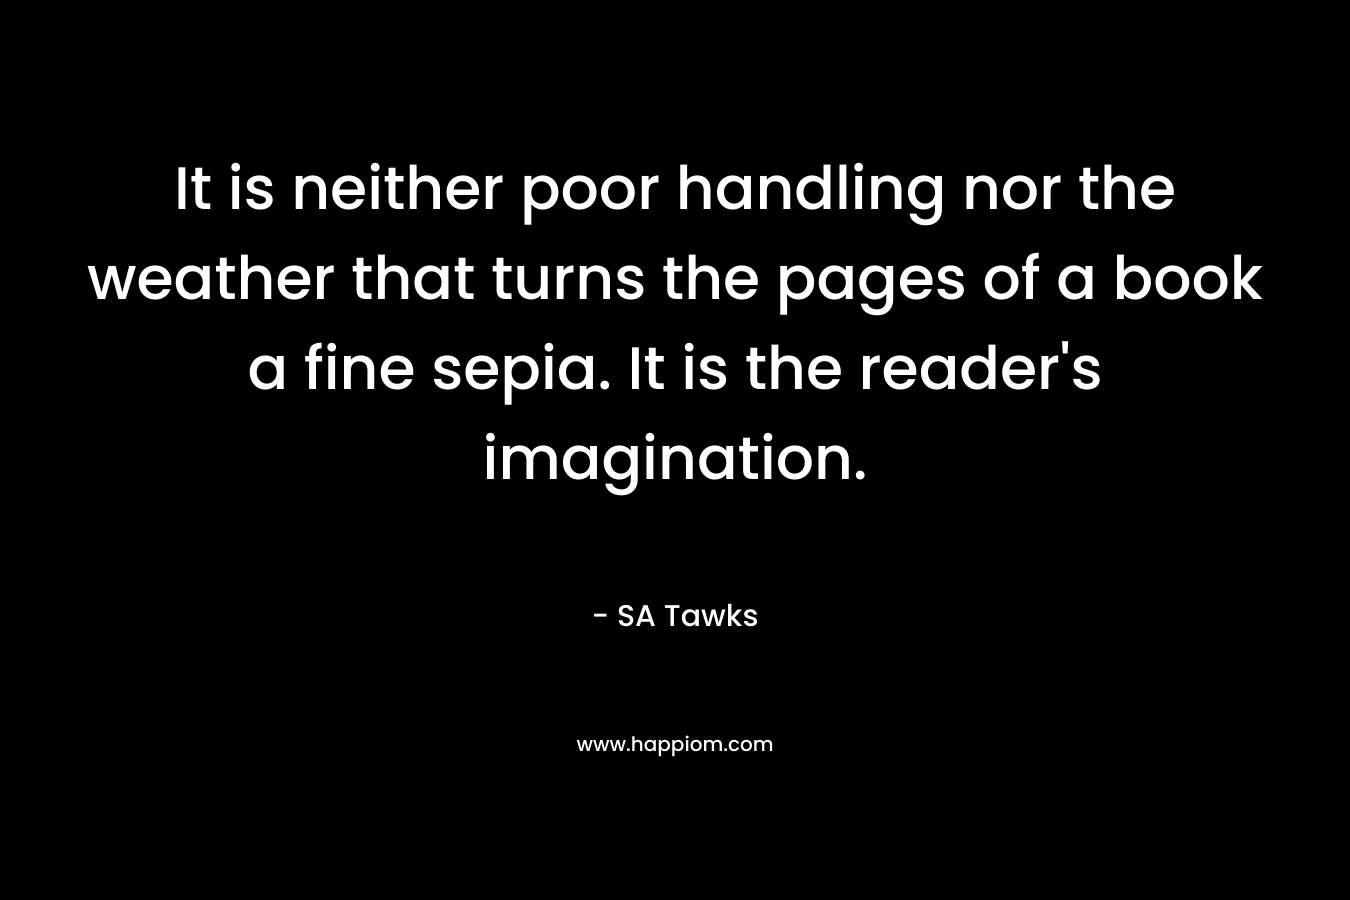 It is neither poor handling nor the weather that turns the pages of a book a fine sepia. It is the reader’s imagination. – SA Tawks